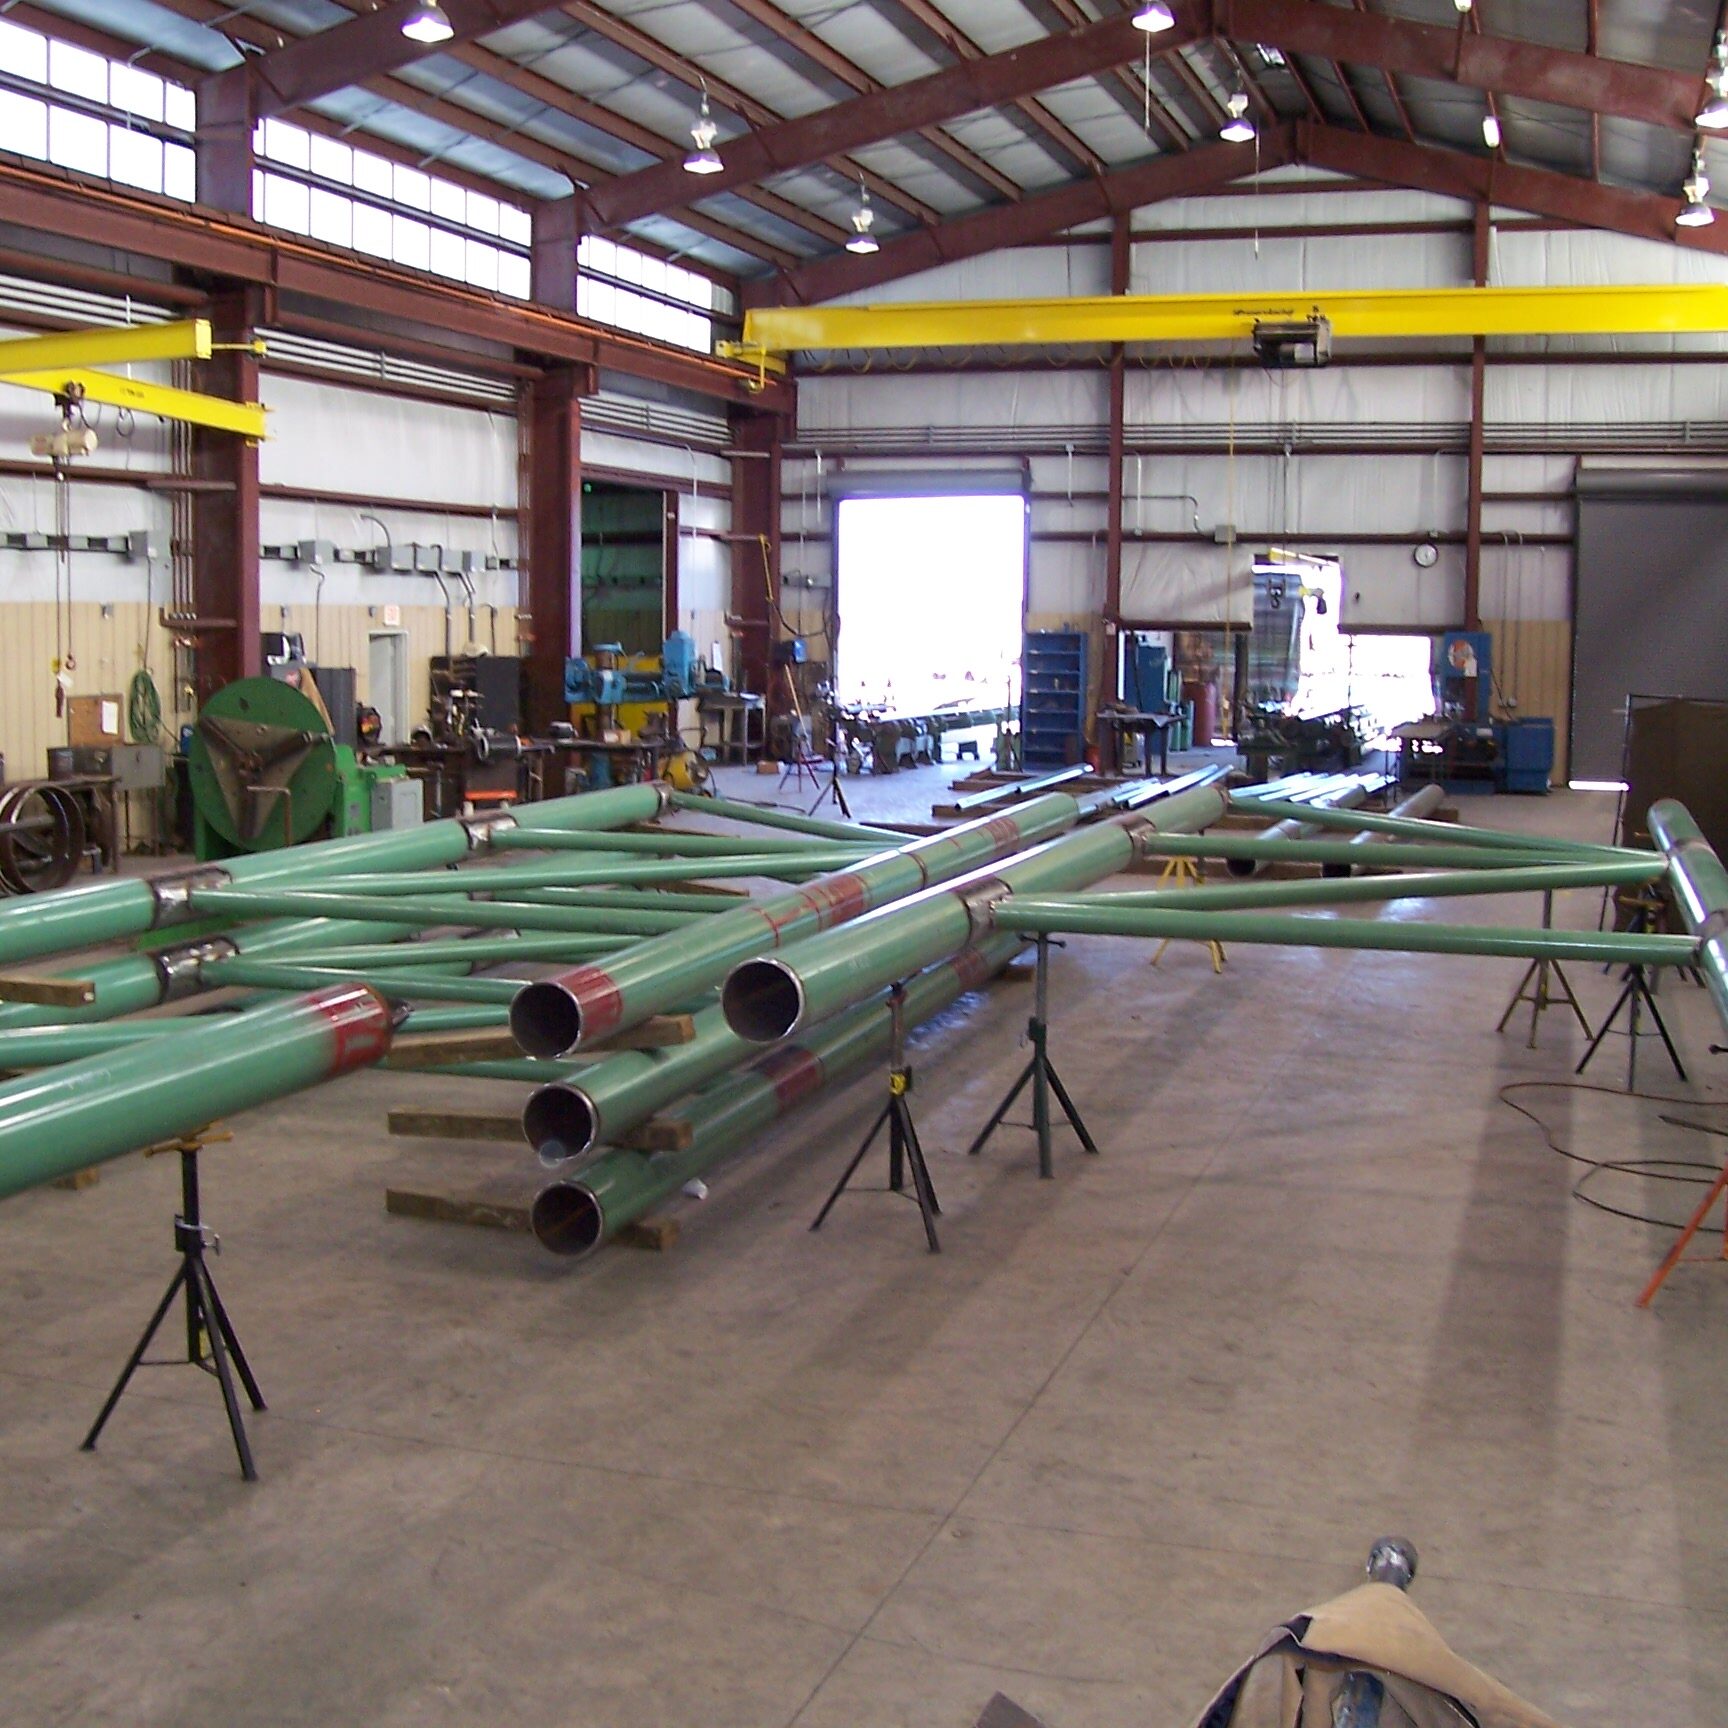 Trade's Turnaround and Maintenance Shop ready to help with pipe fabrication